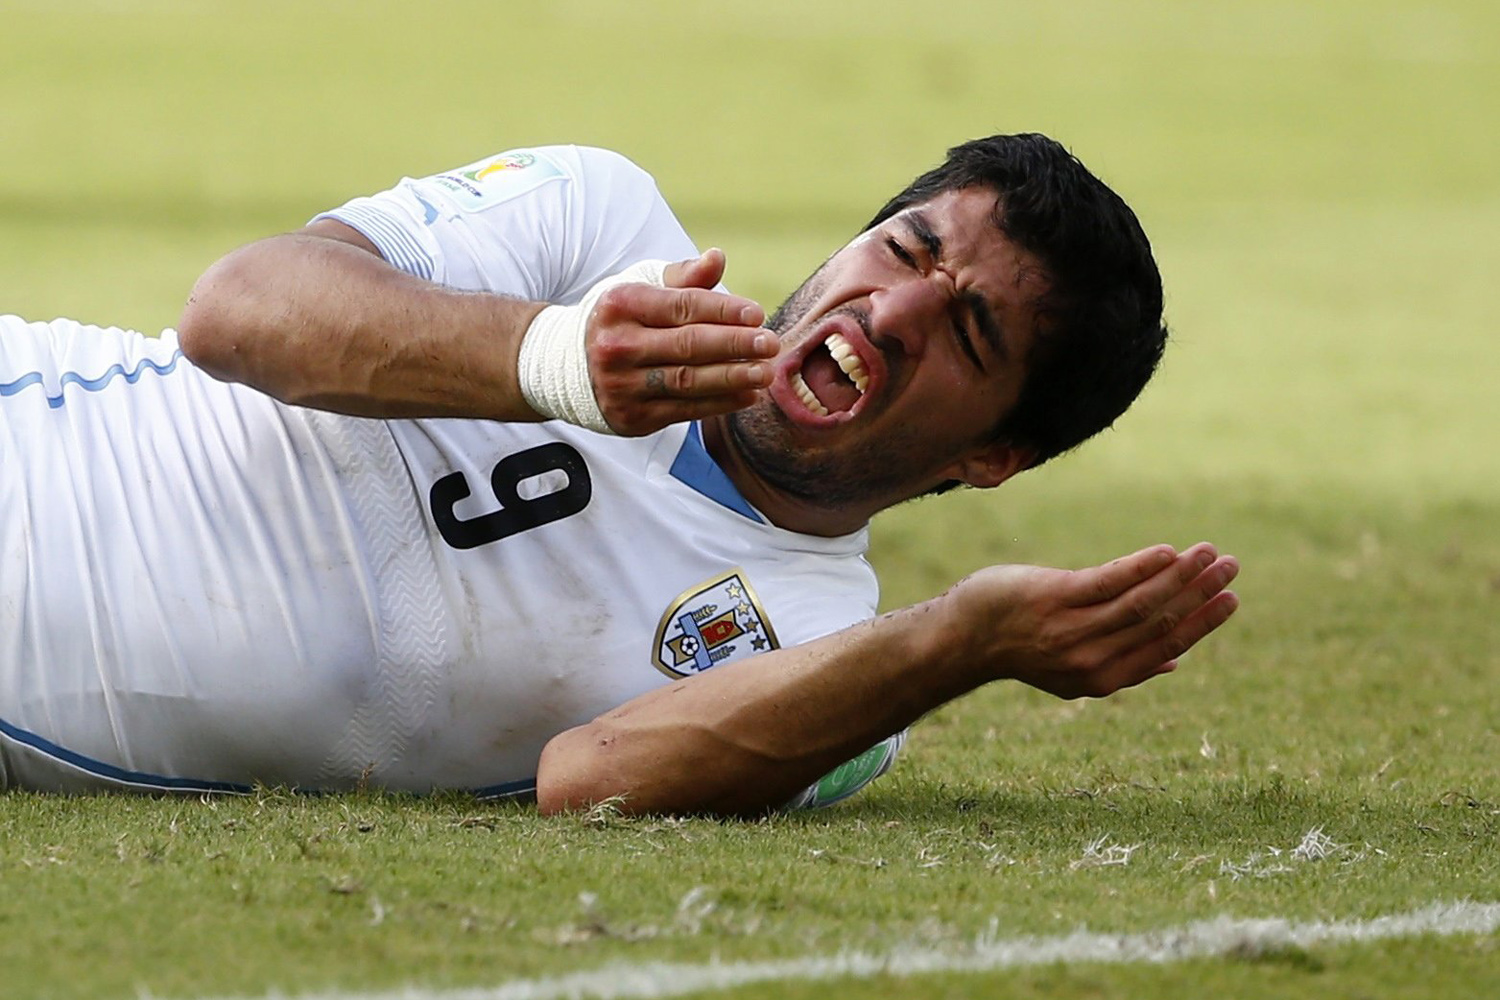 File photo of Uruguay's Luis Suarez reacting after clashing with Italy's Giorgio Chiellini during their 2014 World Cup Group D soccer match at the Dunas arena in Natal